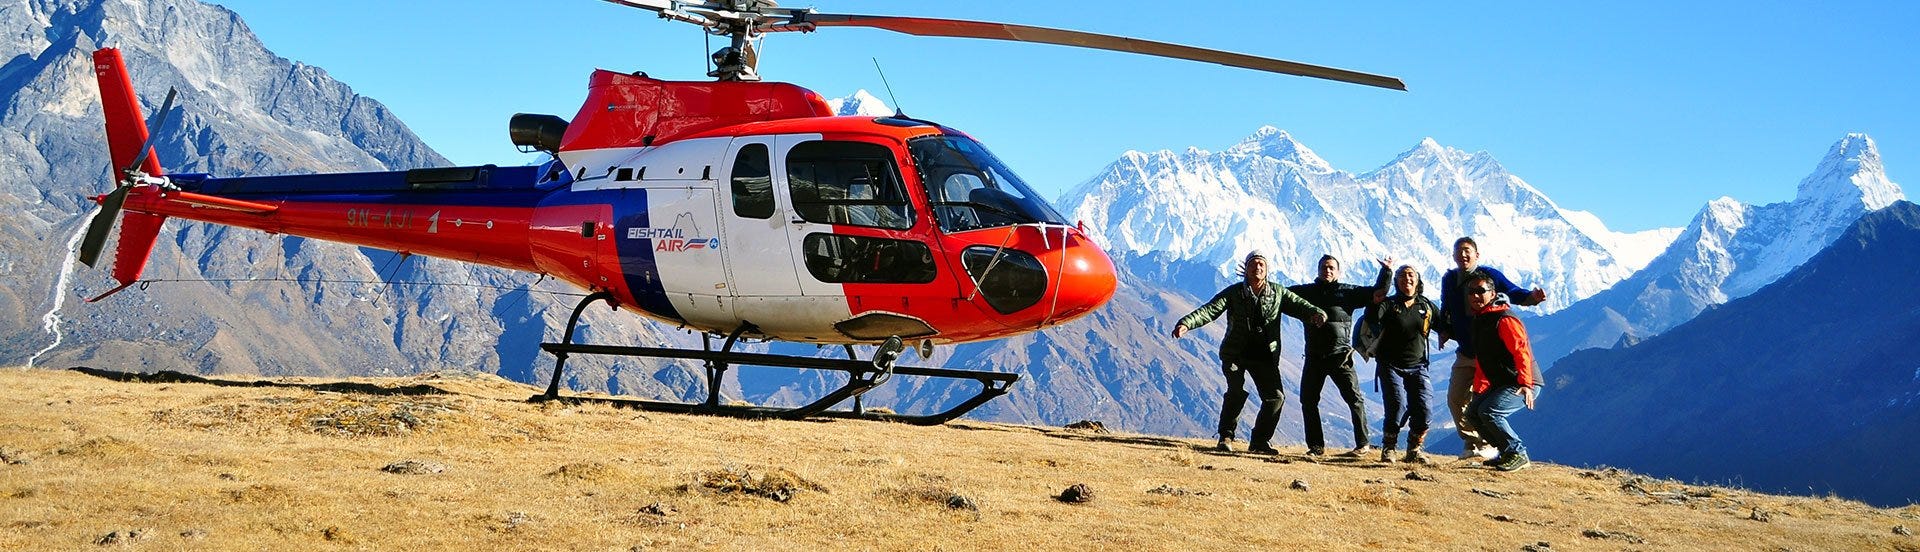 Explore Nepal’s Helicopter Tours and Feel the Excitement